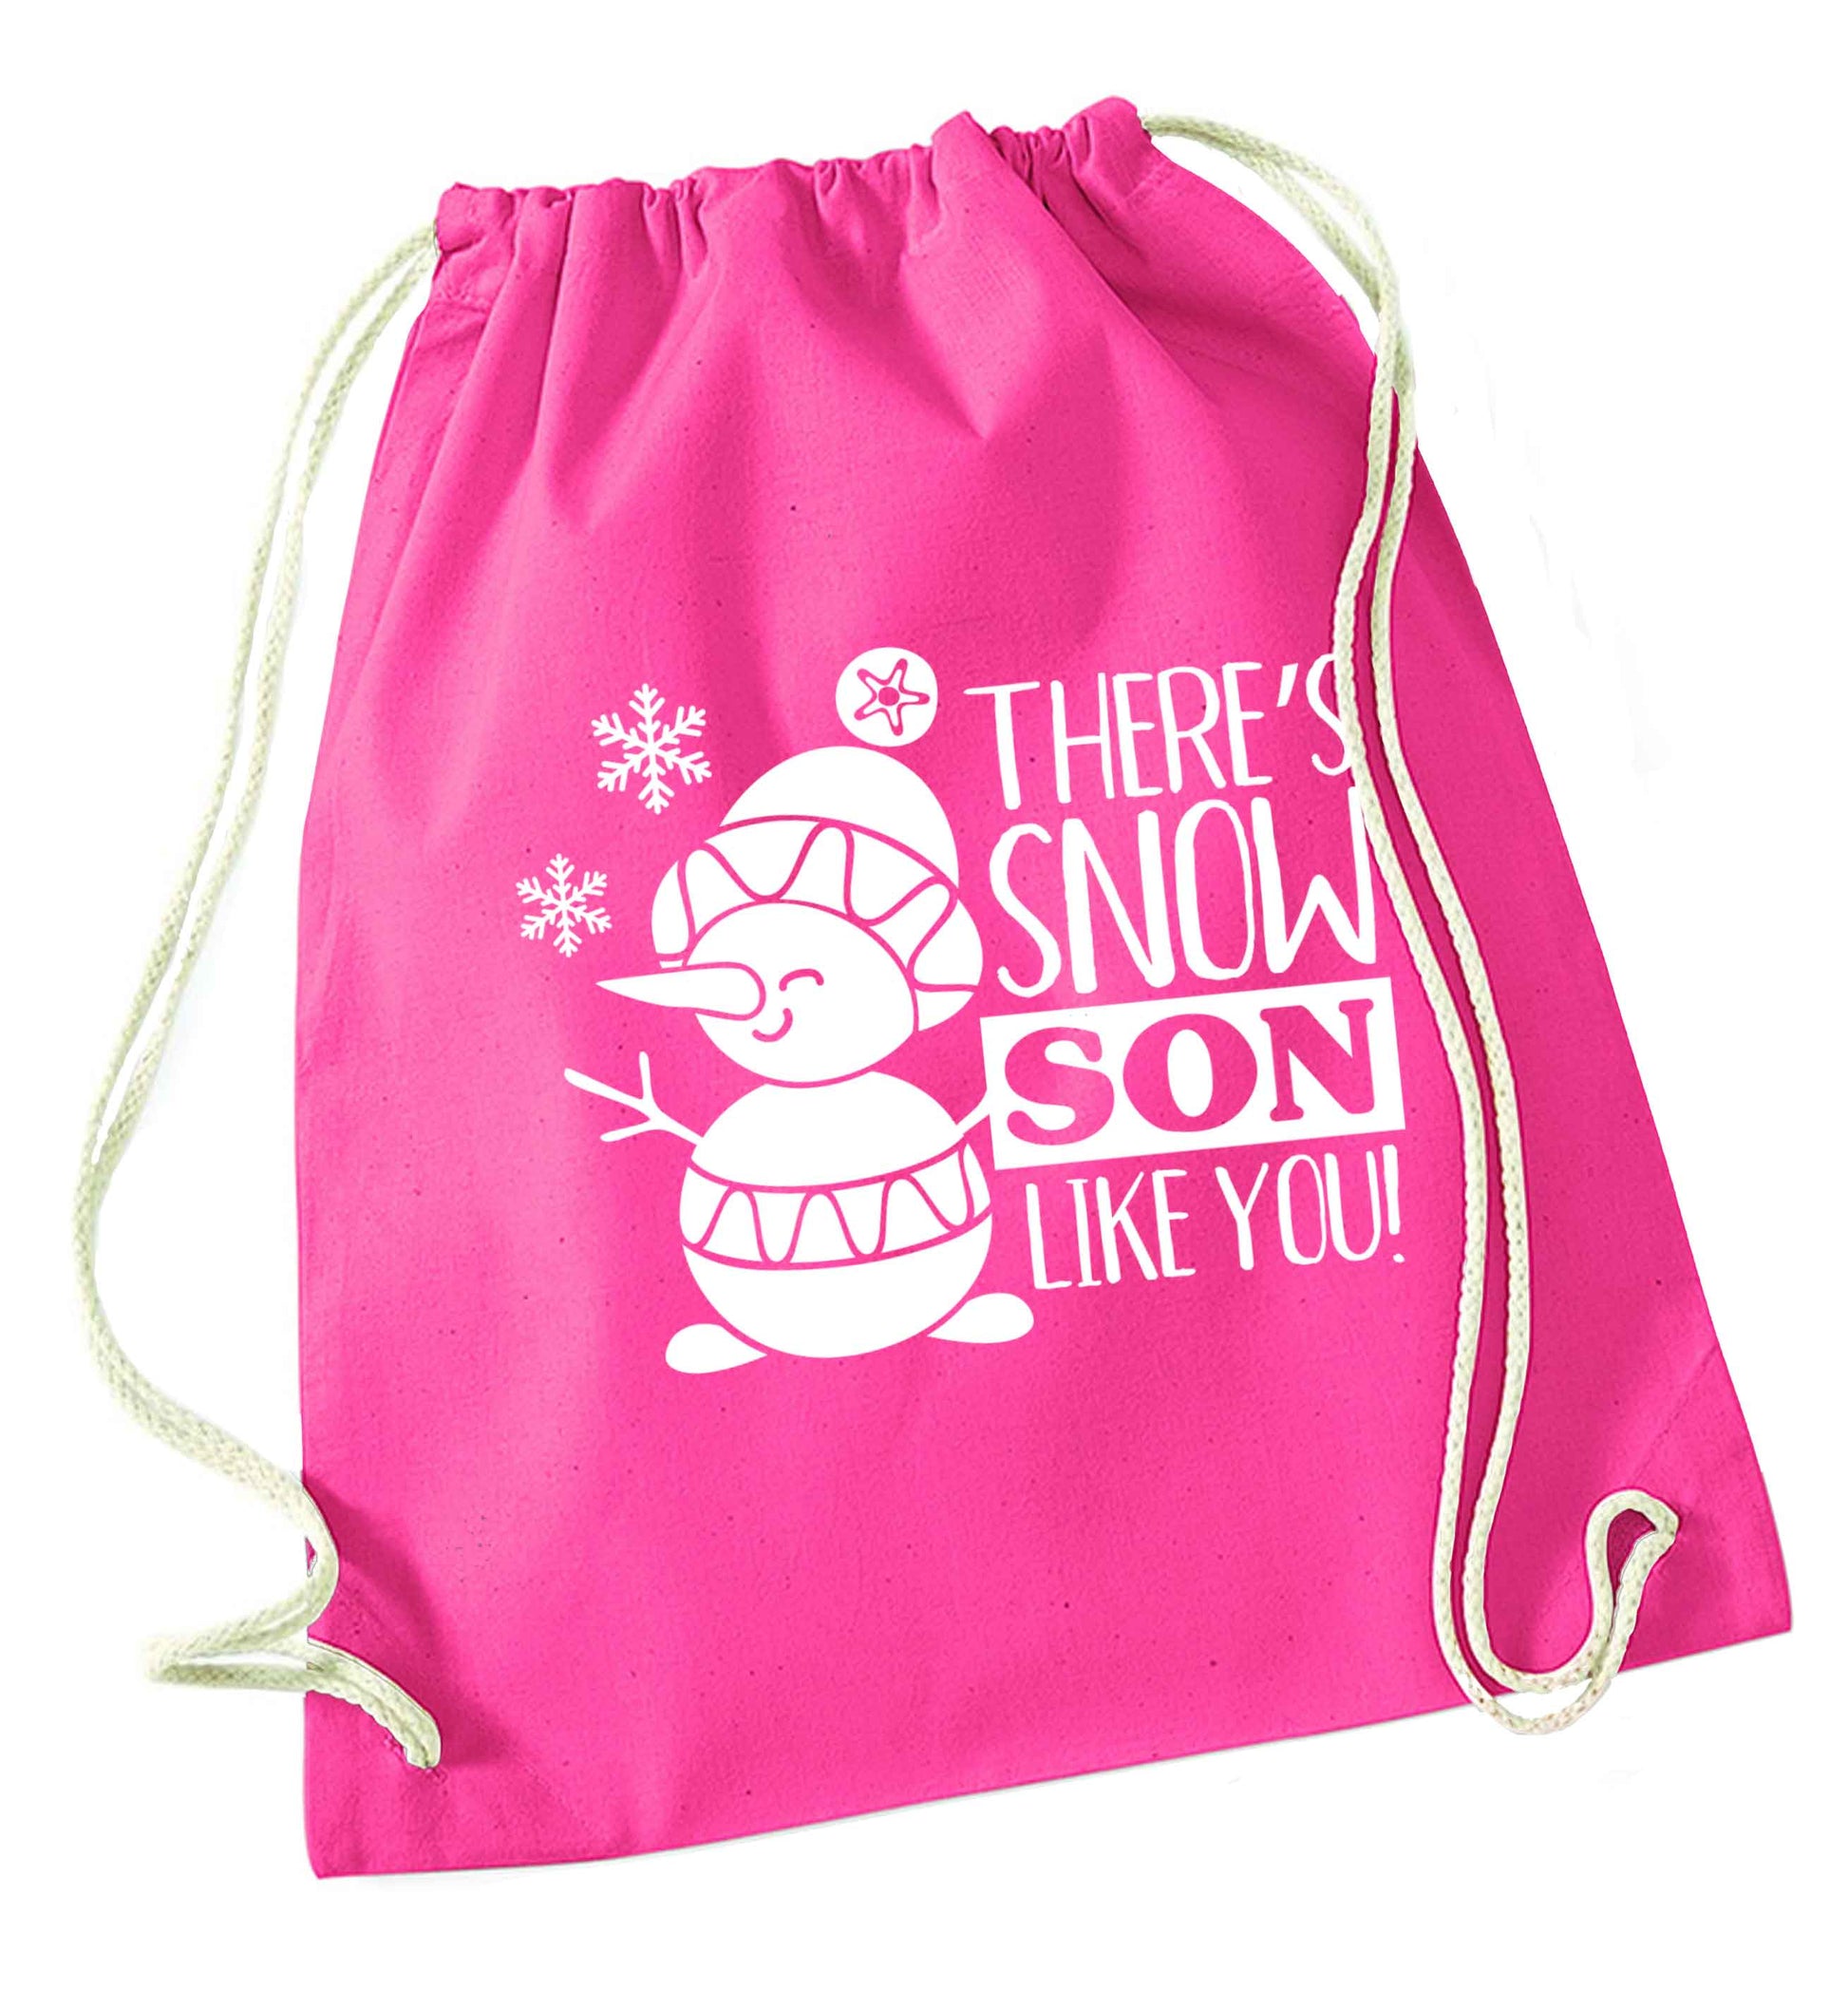 There's snow son like you pink drawstring bag